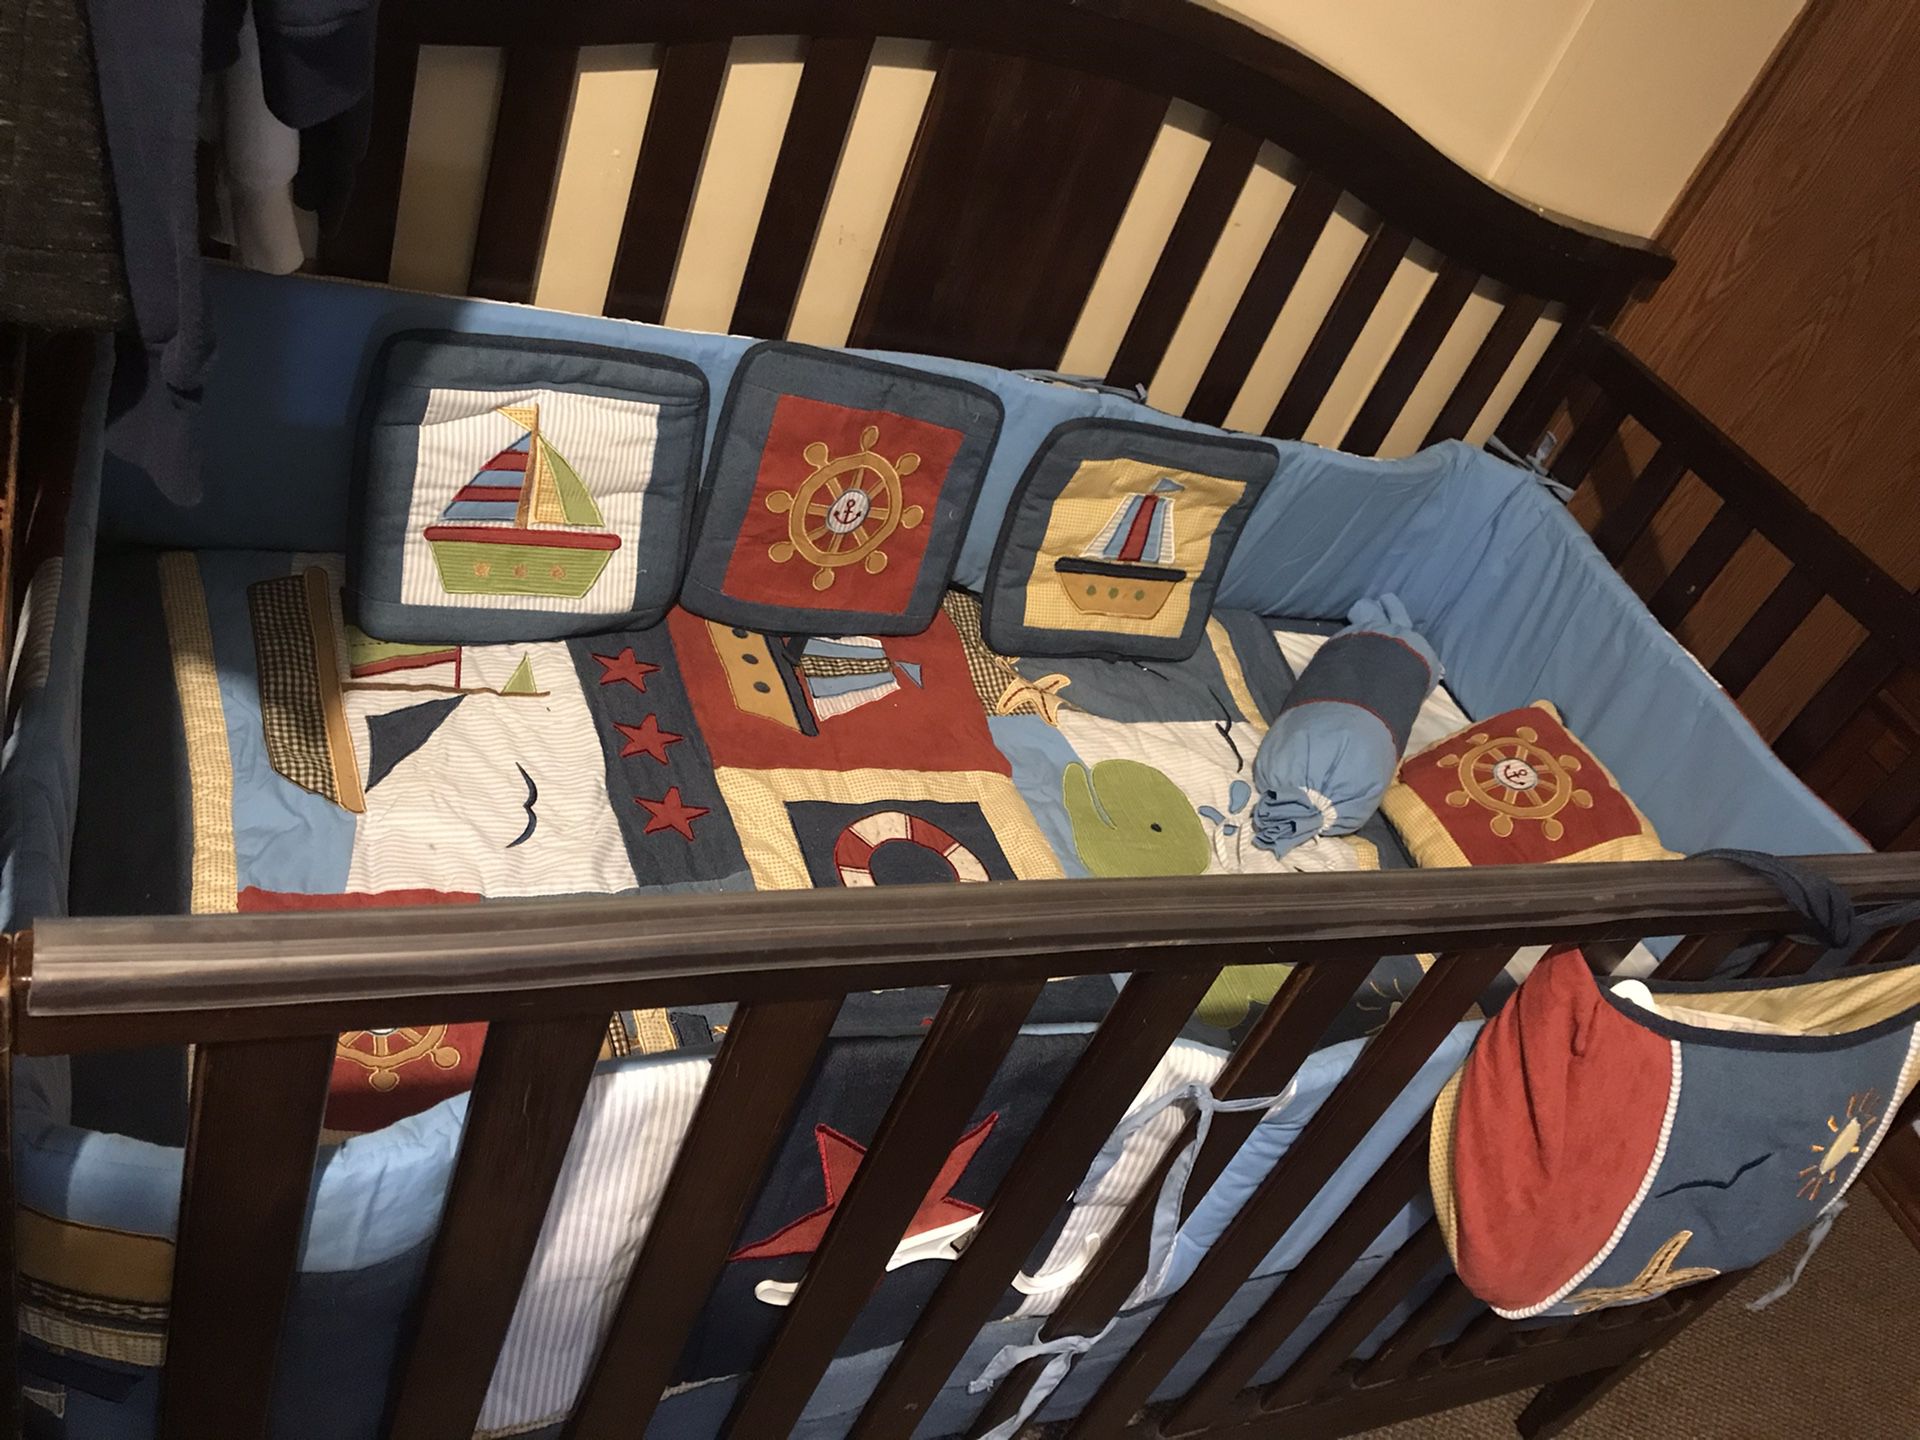 Lightly Used Baby Necessities - Crib, Car Seat, Baby Seats